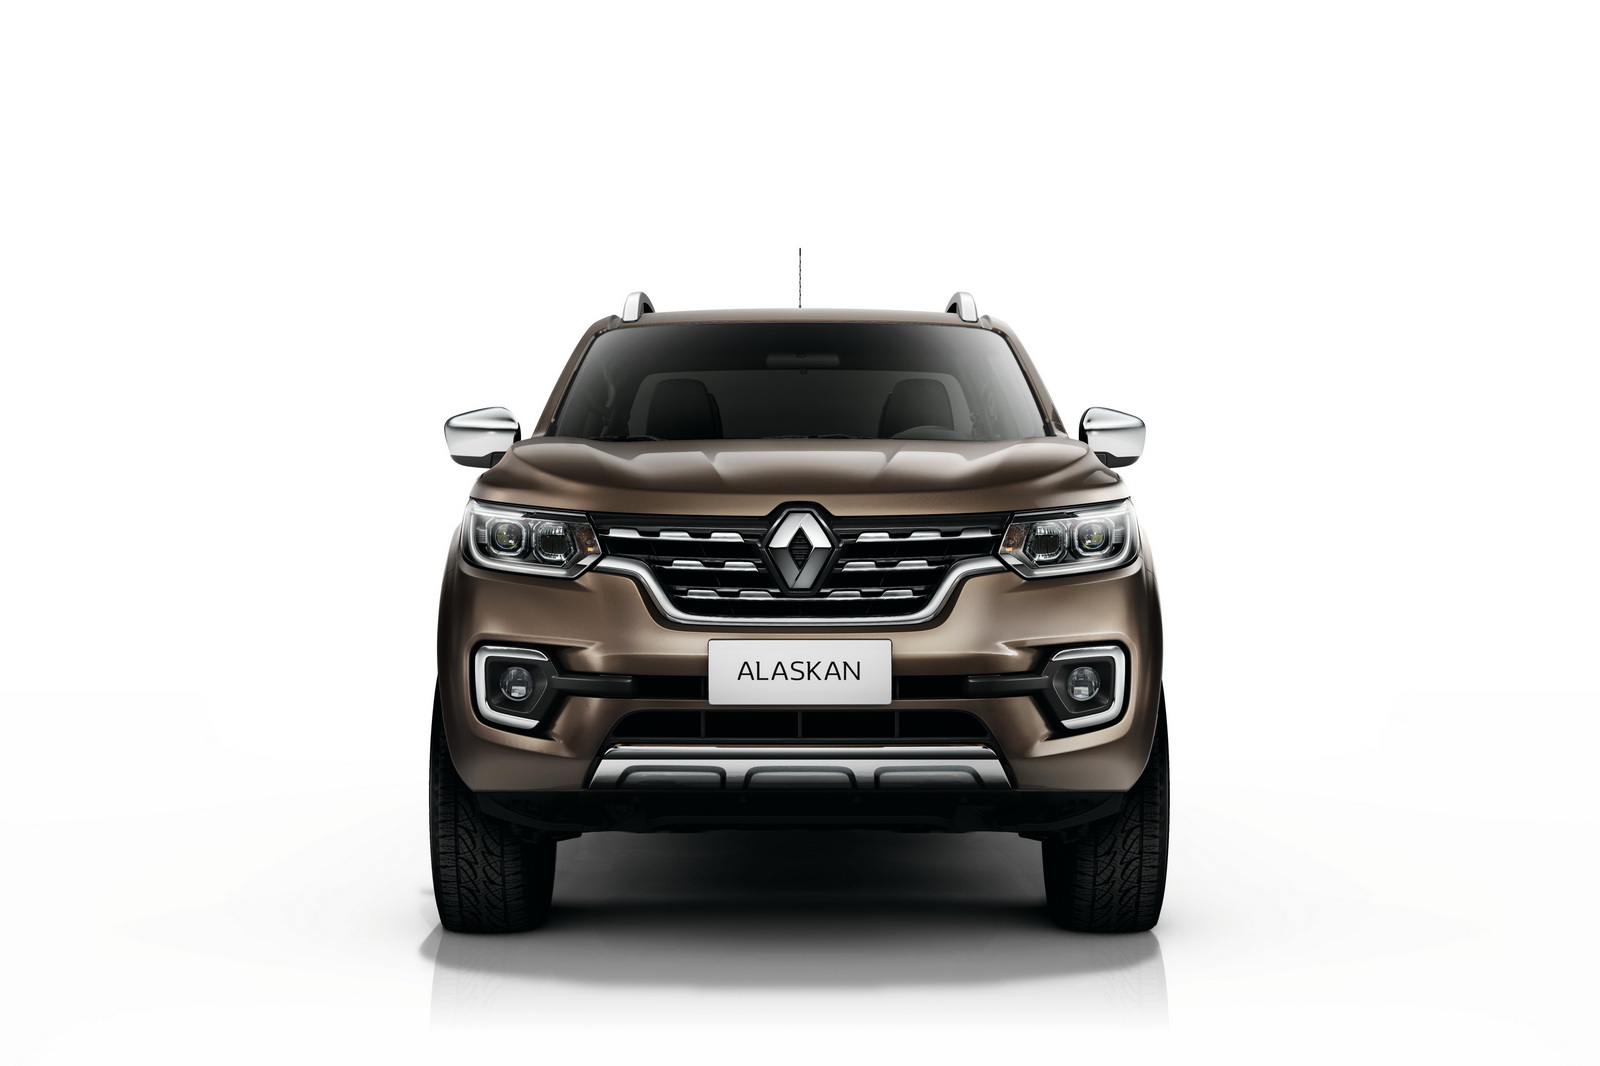 Renault Heading To Geneva With 'EV Surprise', Facelifted Captur | Carscoops1600 x 1066